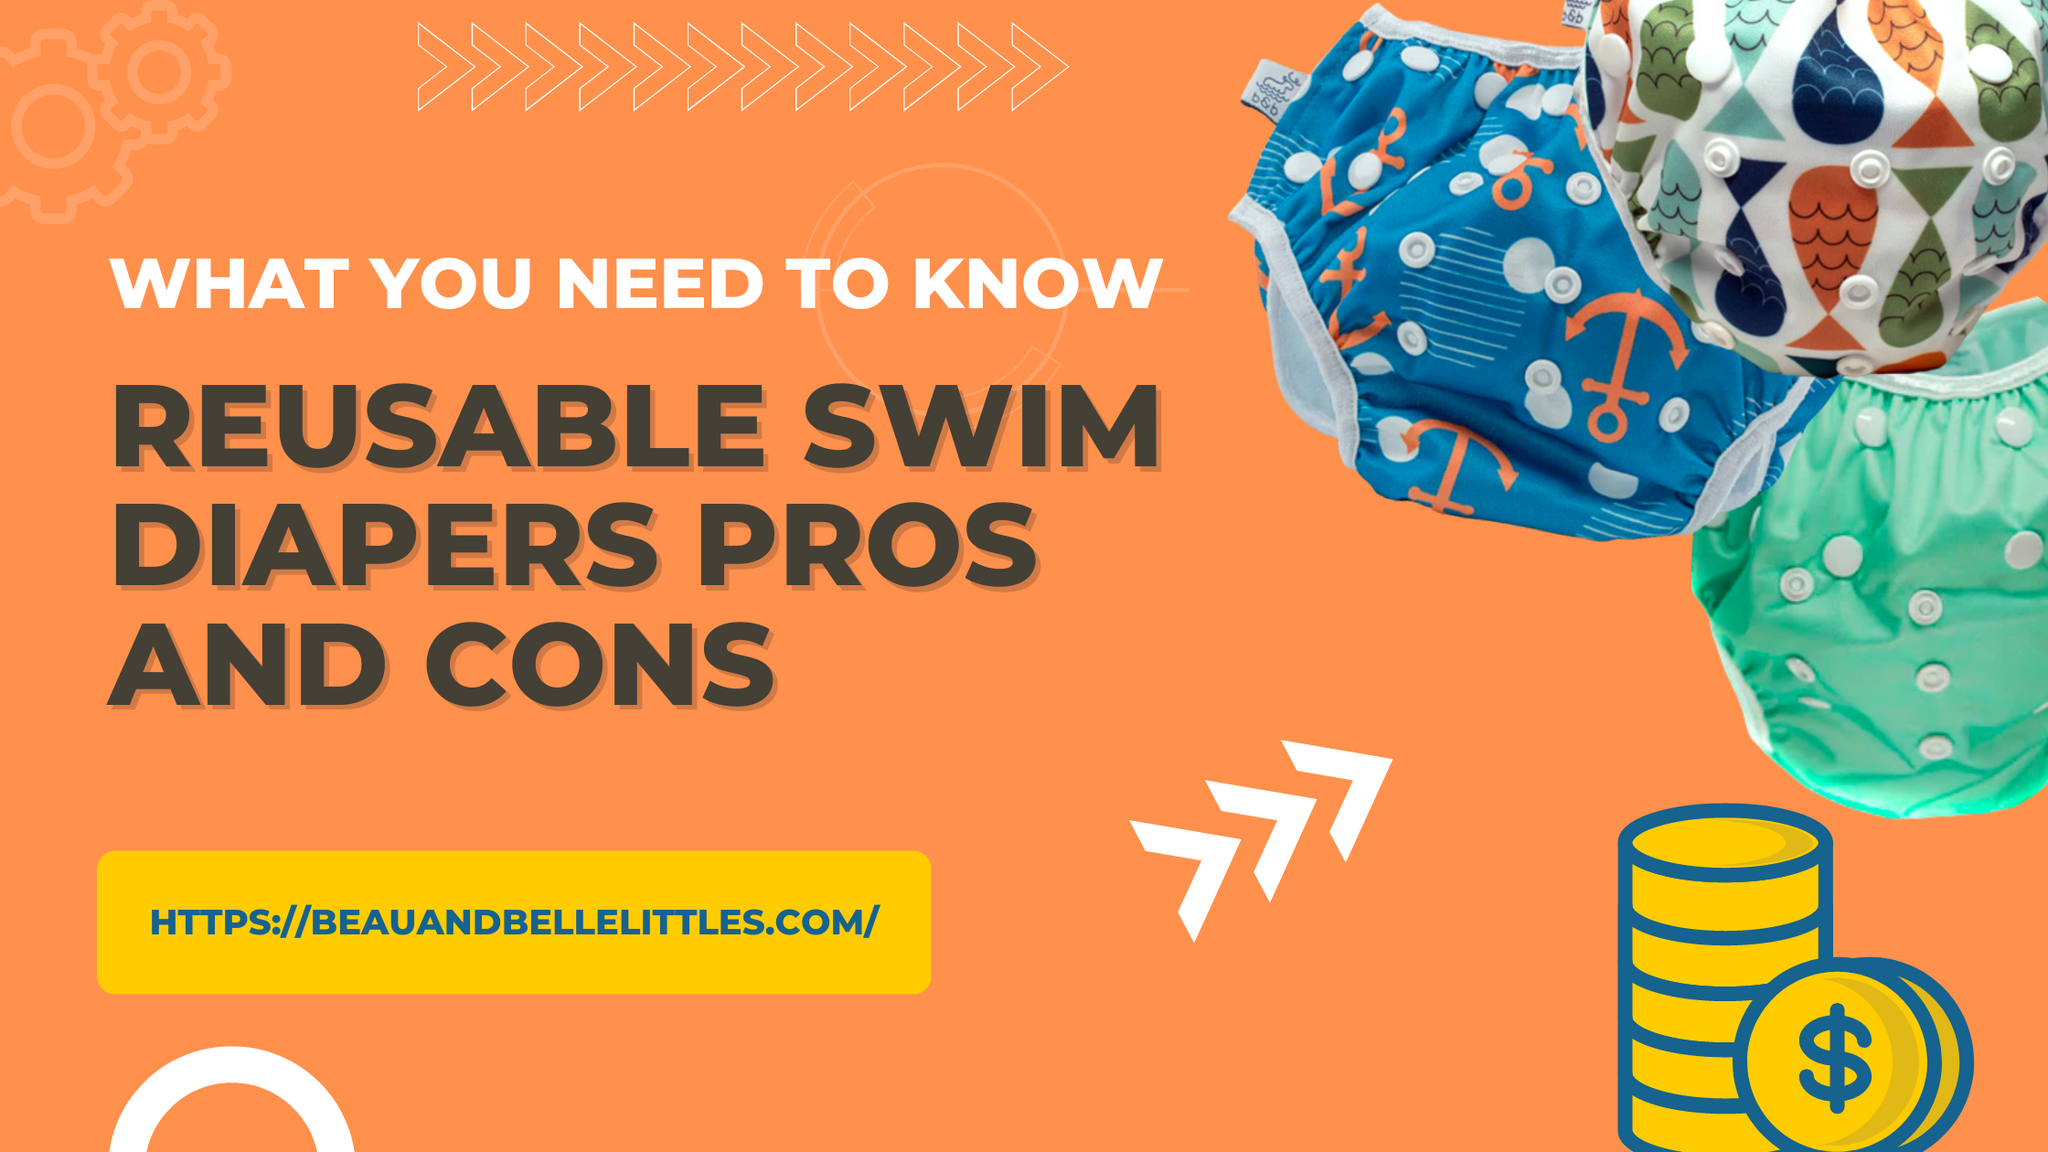 Reusable Swim Diapers Pros and Cons: What You Need To Know